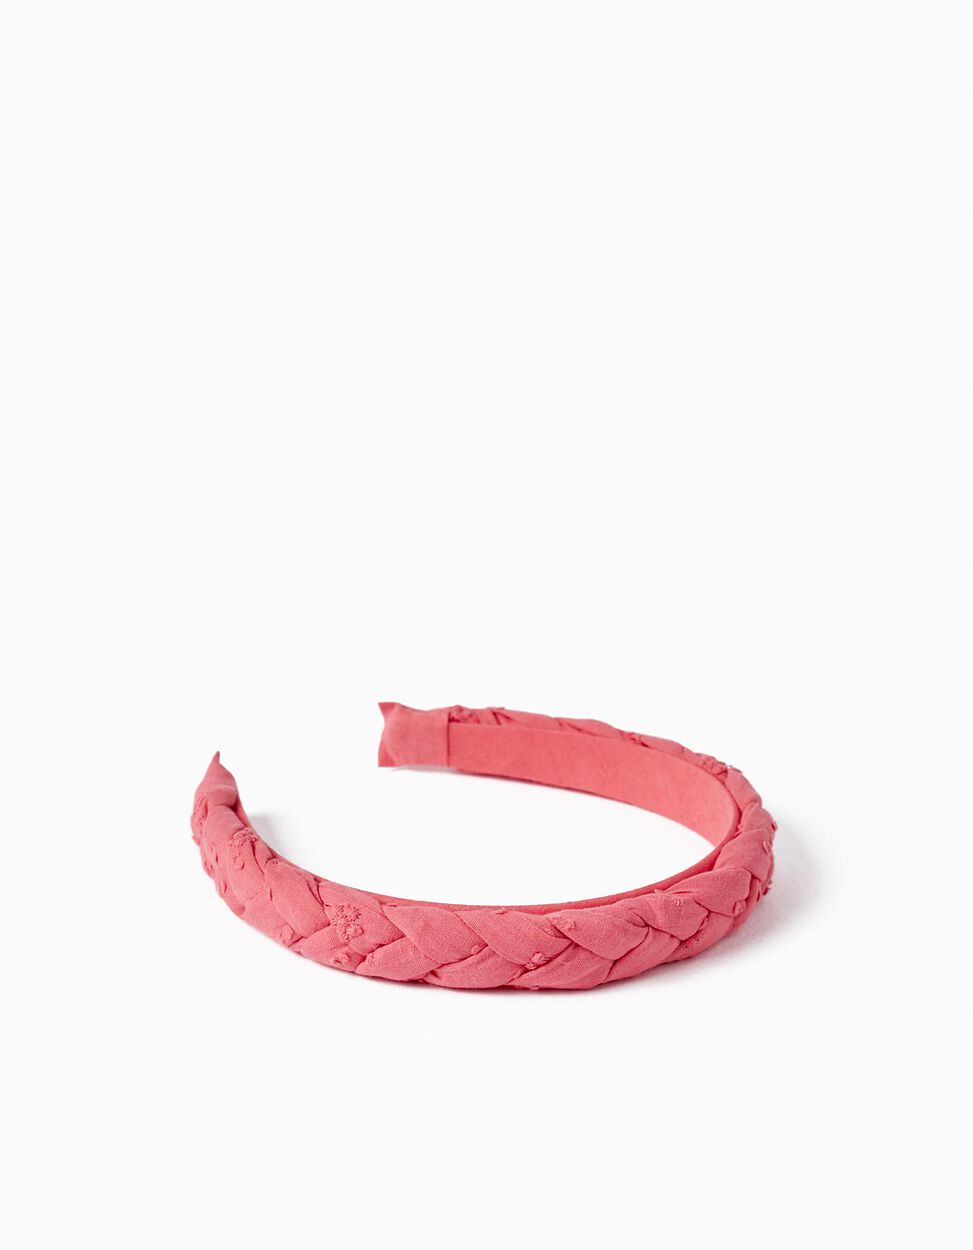 Buy Online Fabric Headband with Braided Detail for Girls, Pink